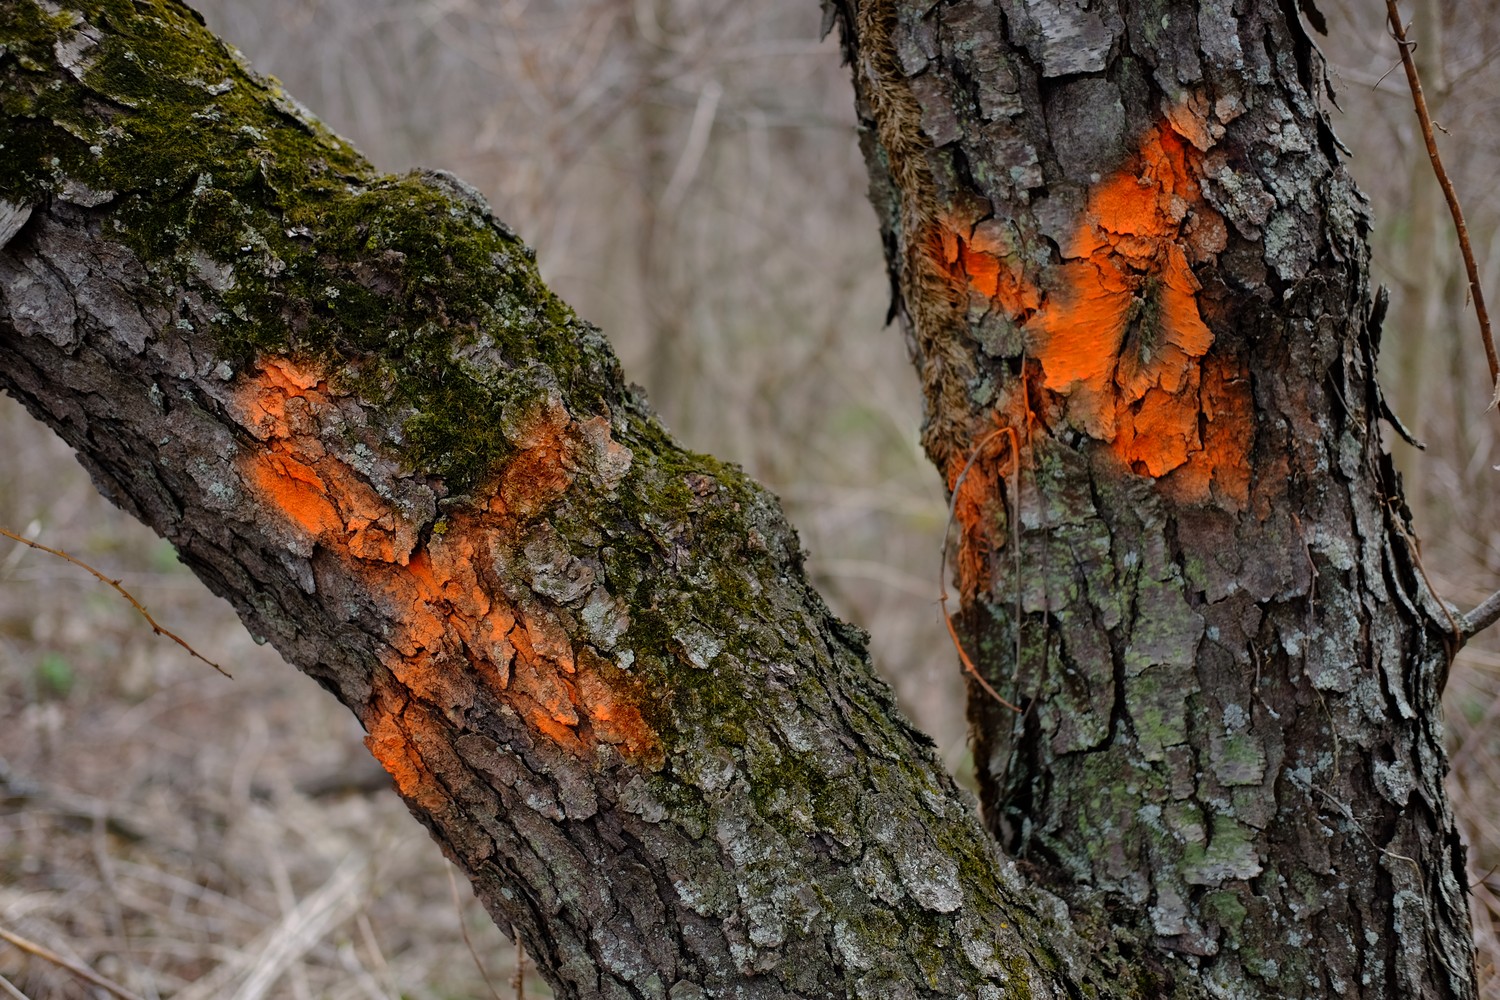 A tree with two trunks, spray painted with orange Xs